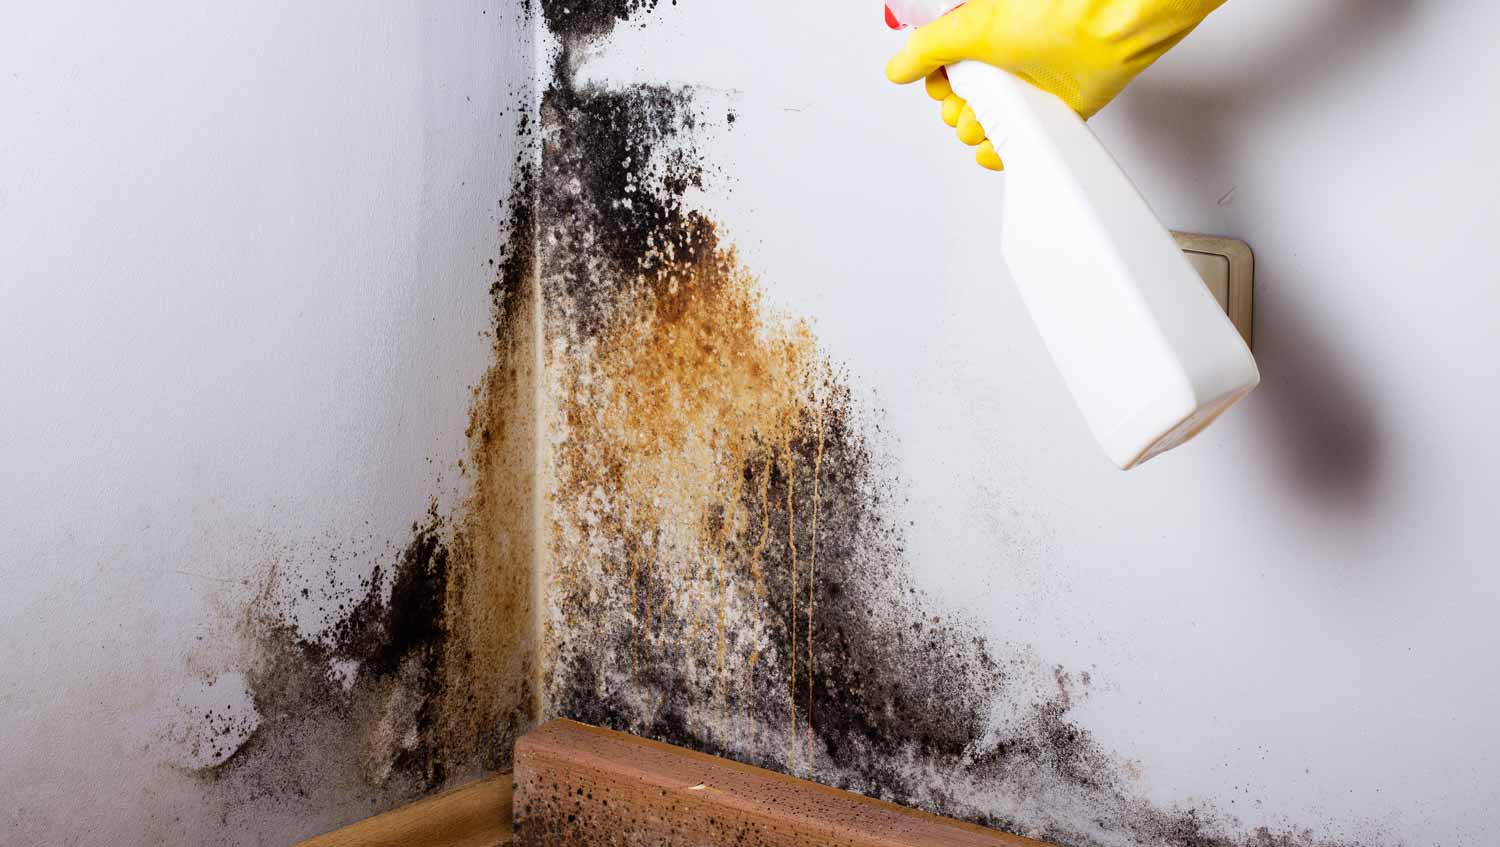 Mold Removal Louisburg NC mold remediation in Louisburg NC